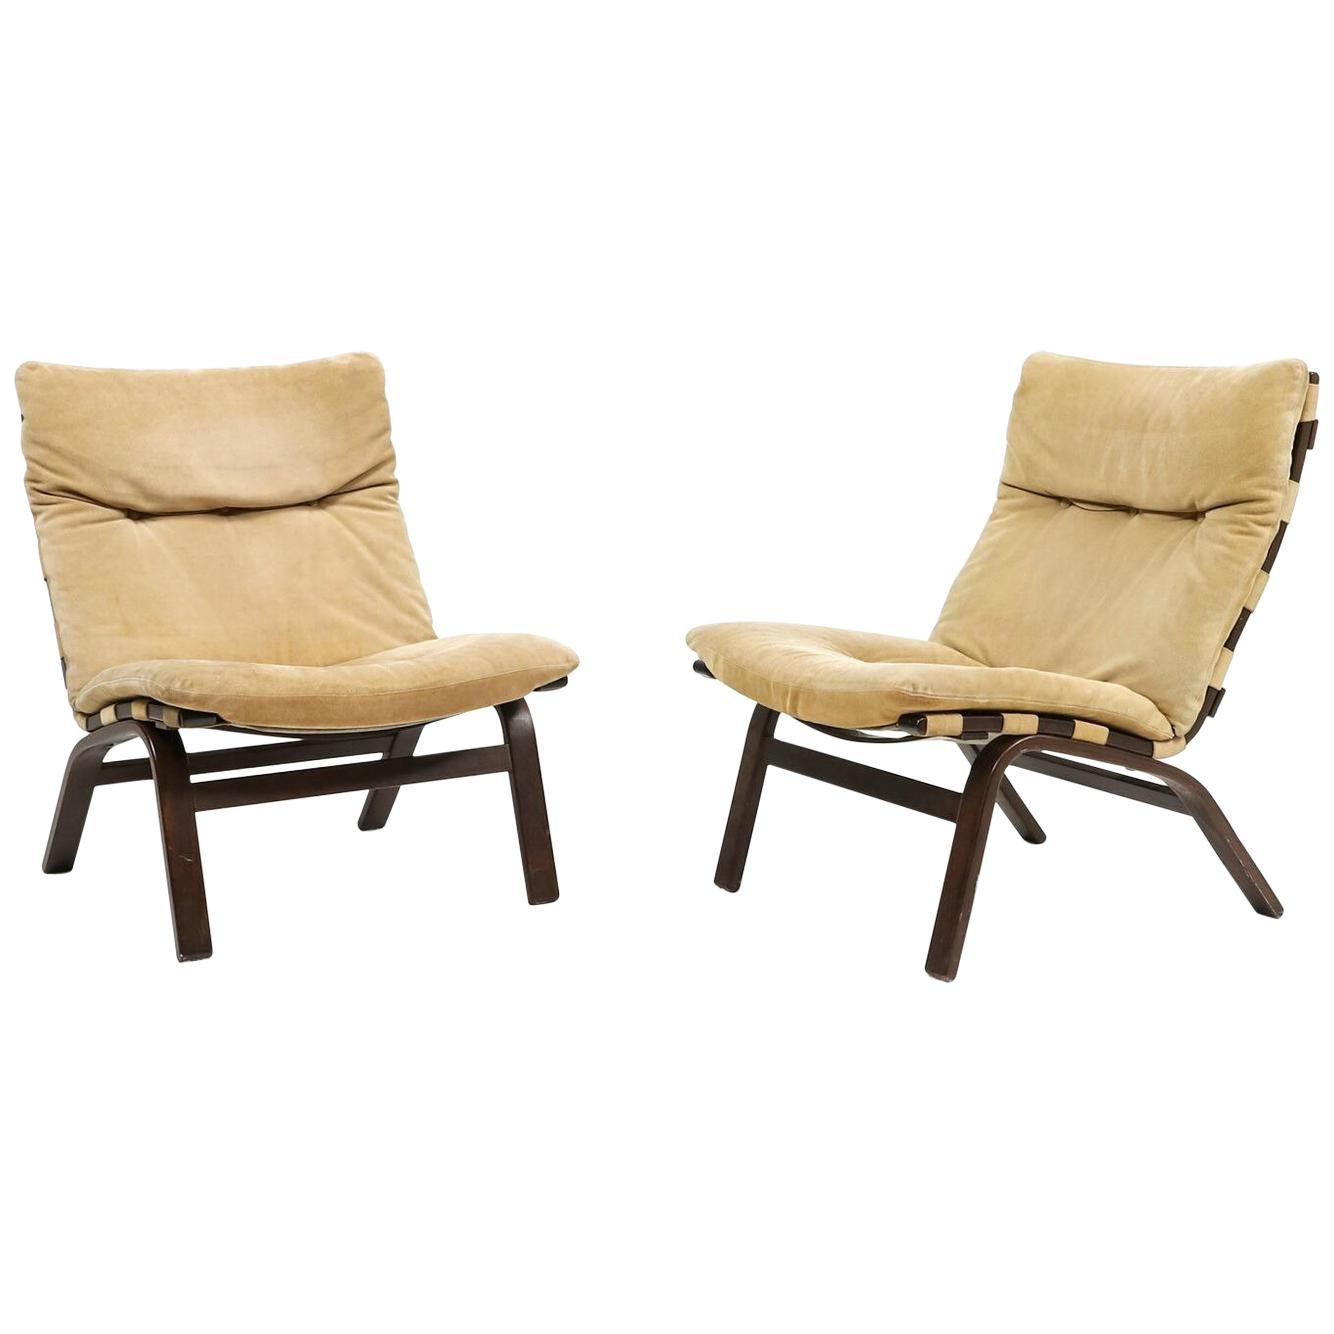 Danish Pair of Relling Style Easy Chairs in Beige Suede by Farstrup